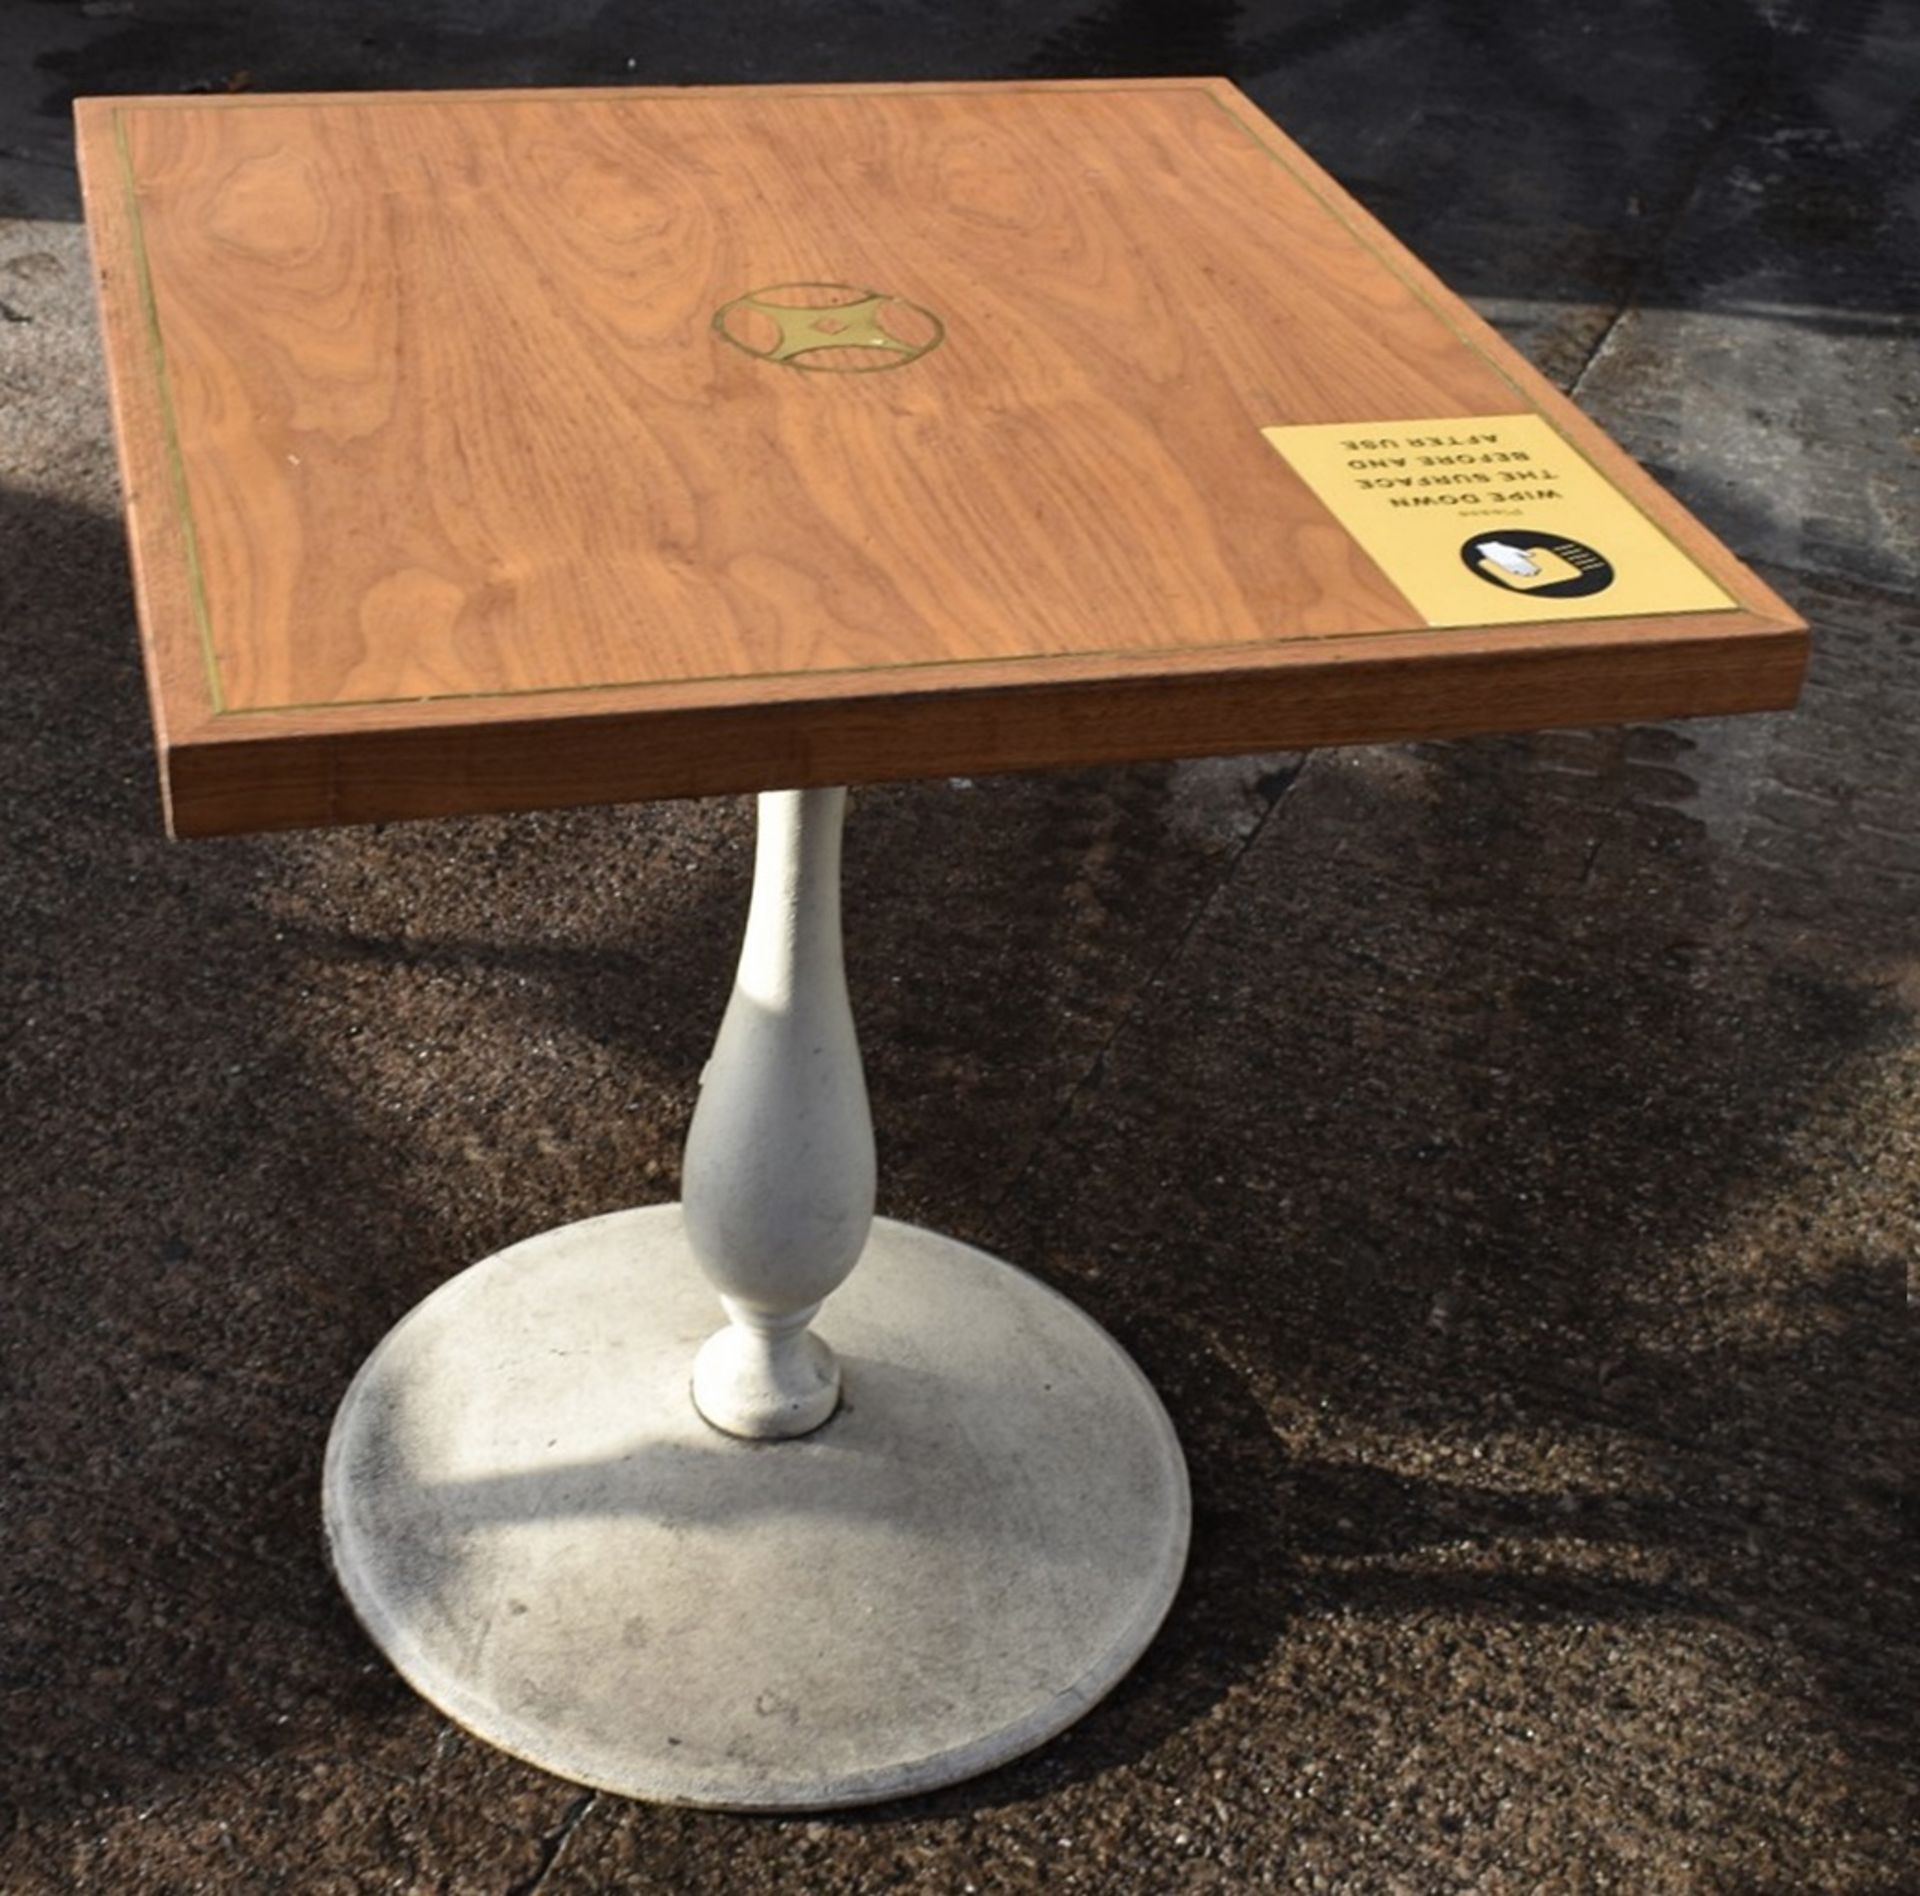 4 x Wooden Topped Bistro Tables Featuring Inlaid Brass Work And Sturdy Metal Bases - Recently - Image 3 of 7